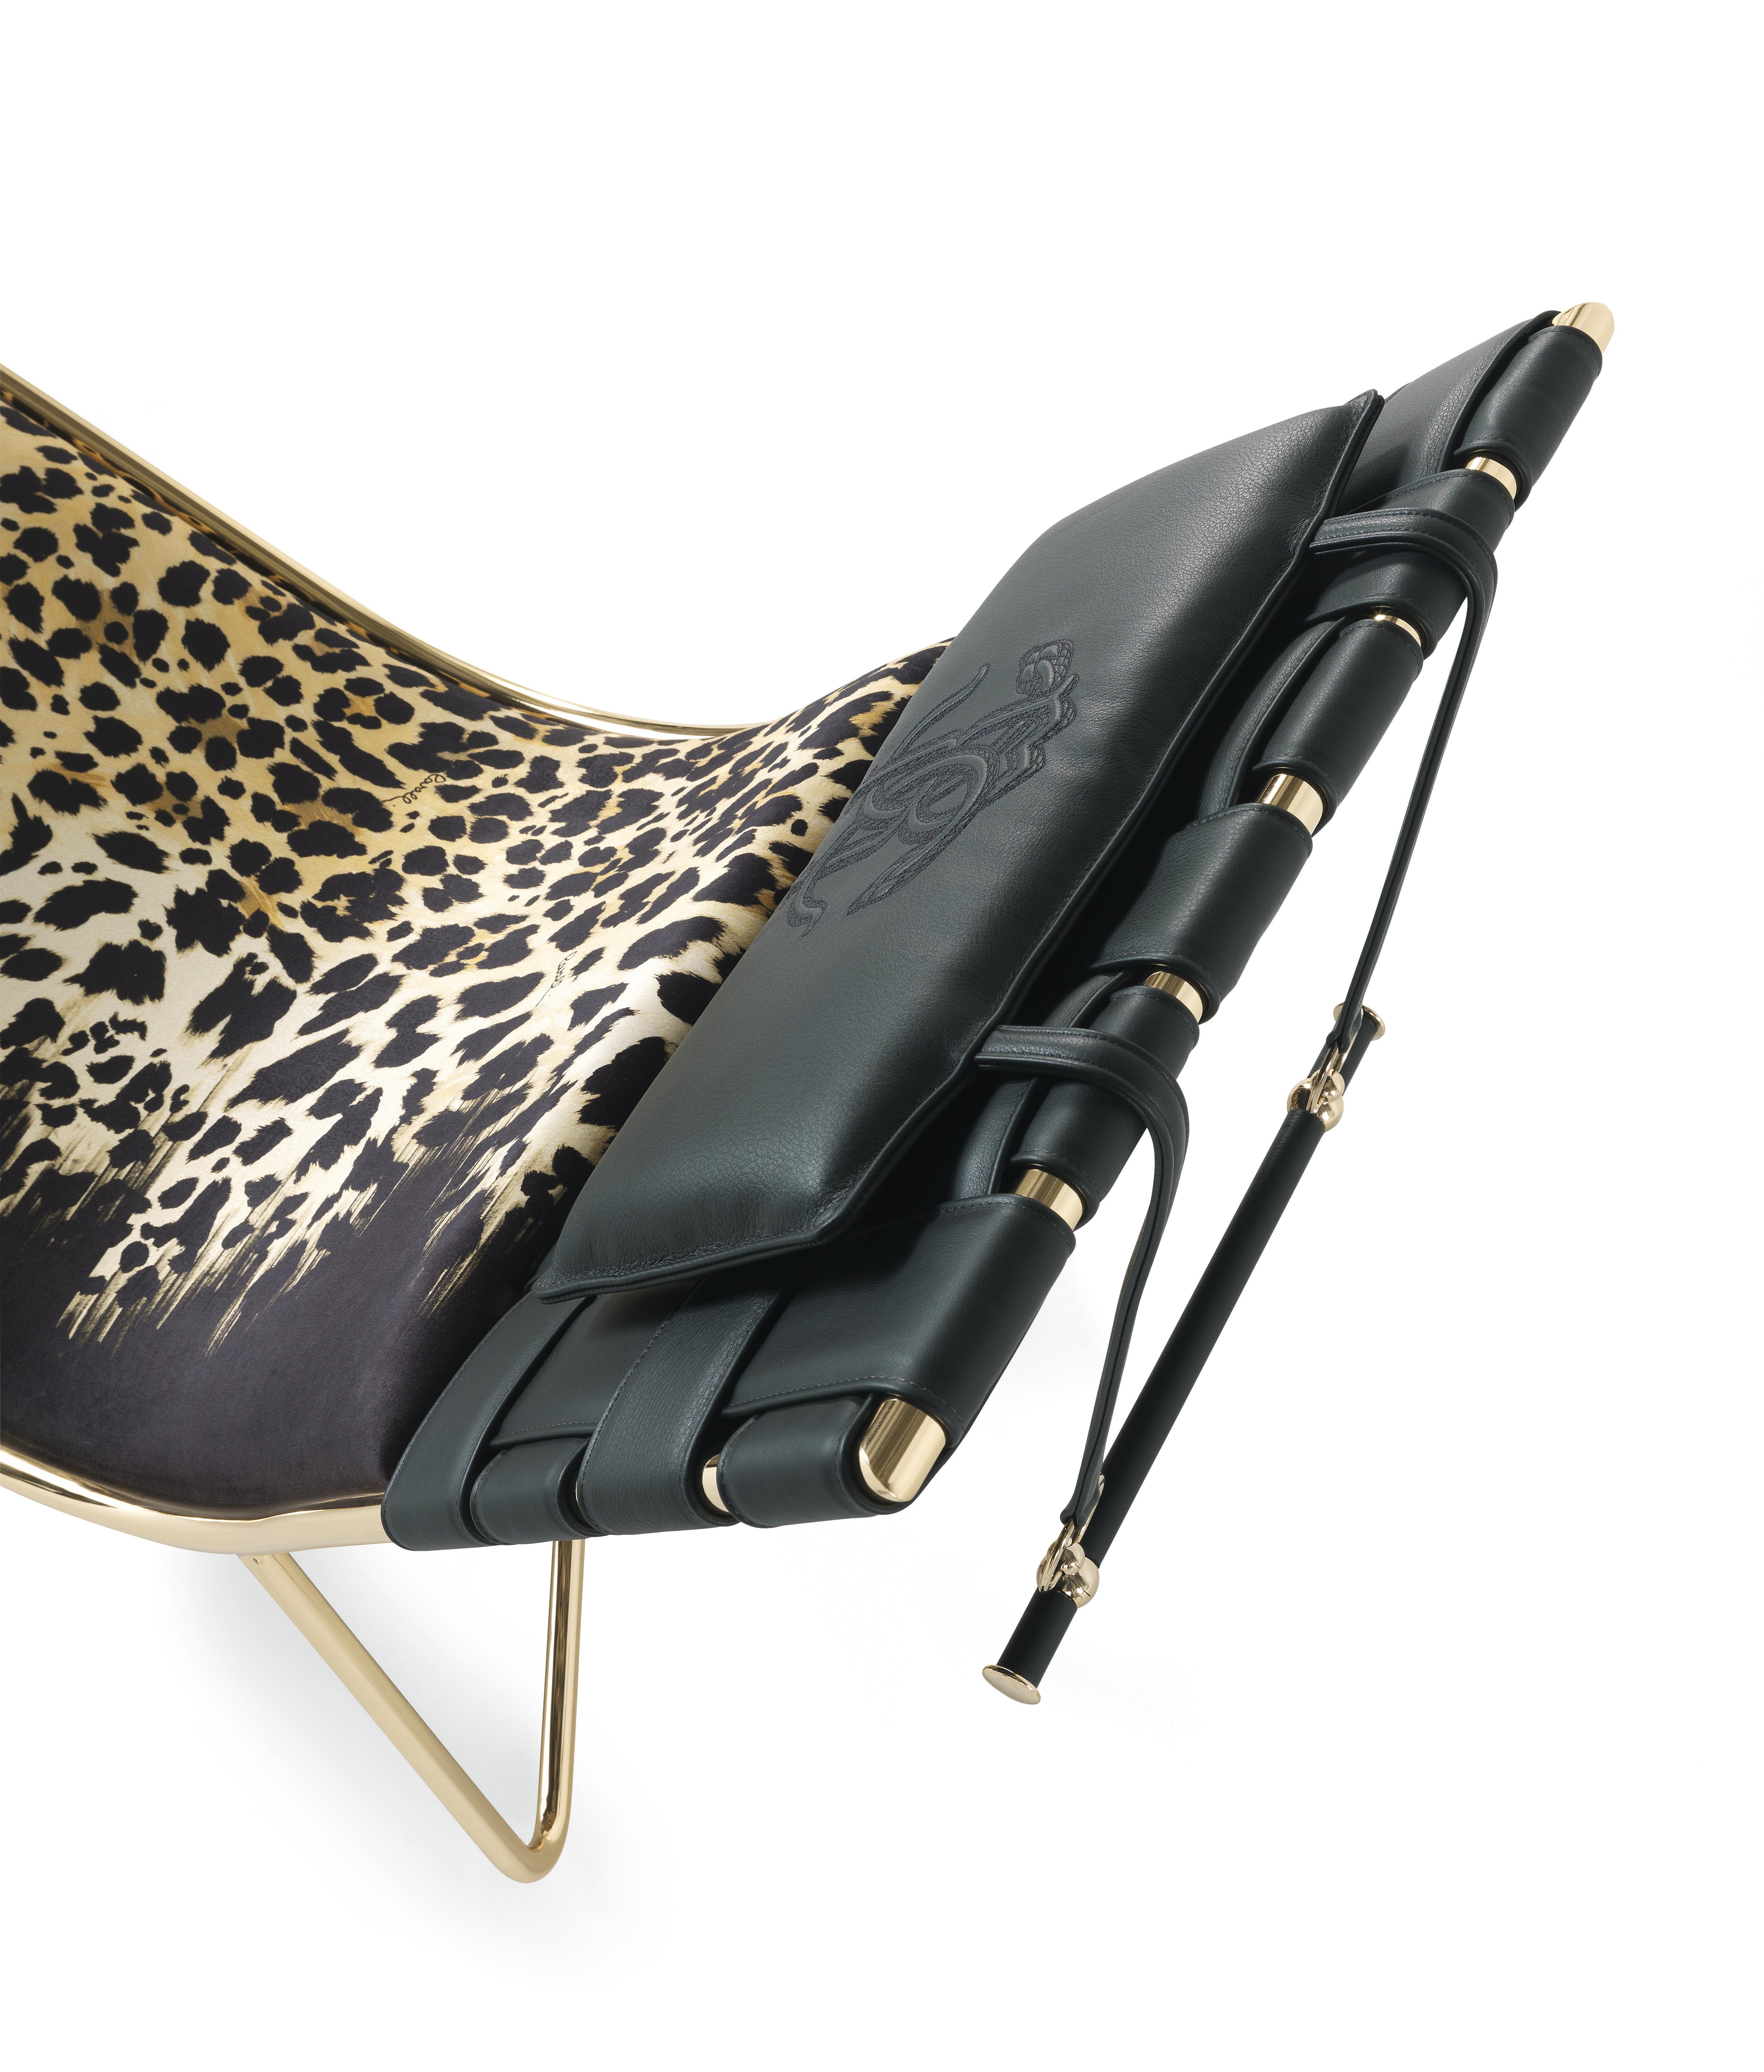 Italian 21st Century Papeete Chaise Lounge in Fabric by Roberto Cavalli Home Interiors For Sale